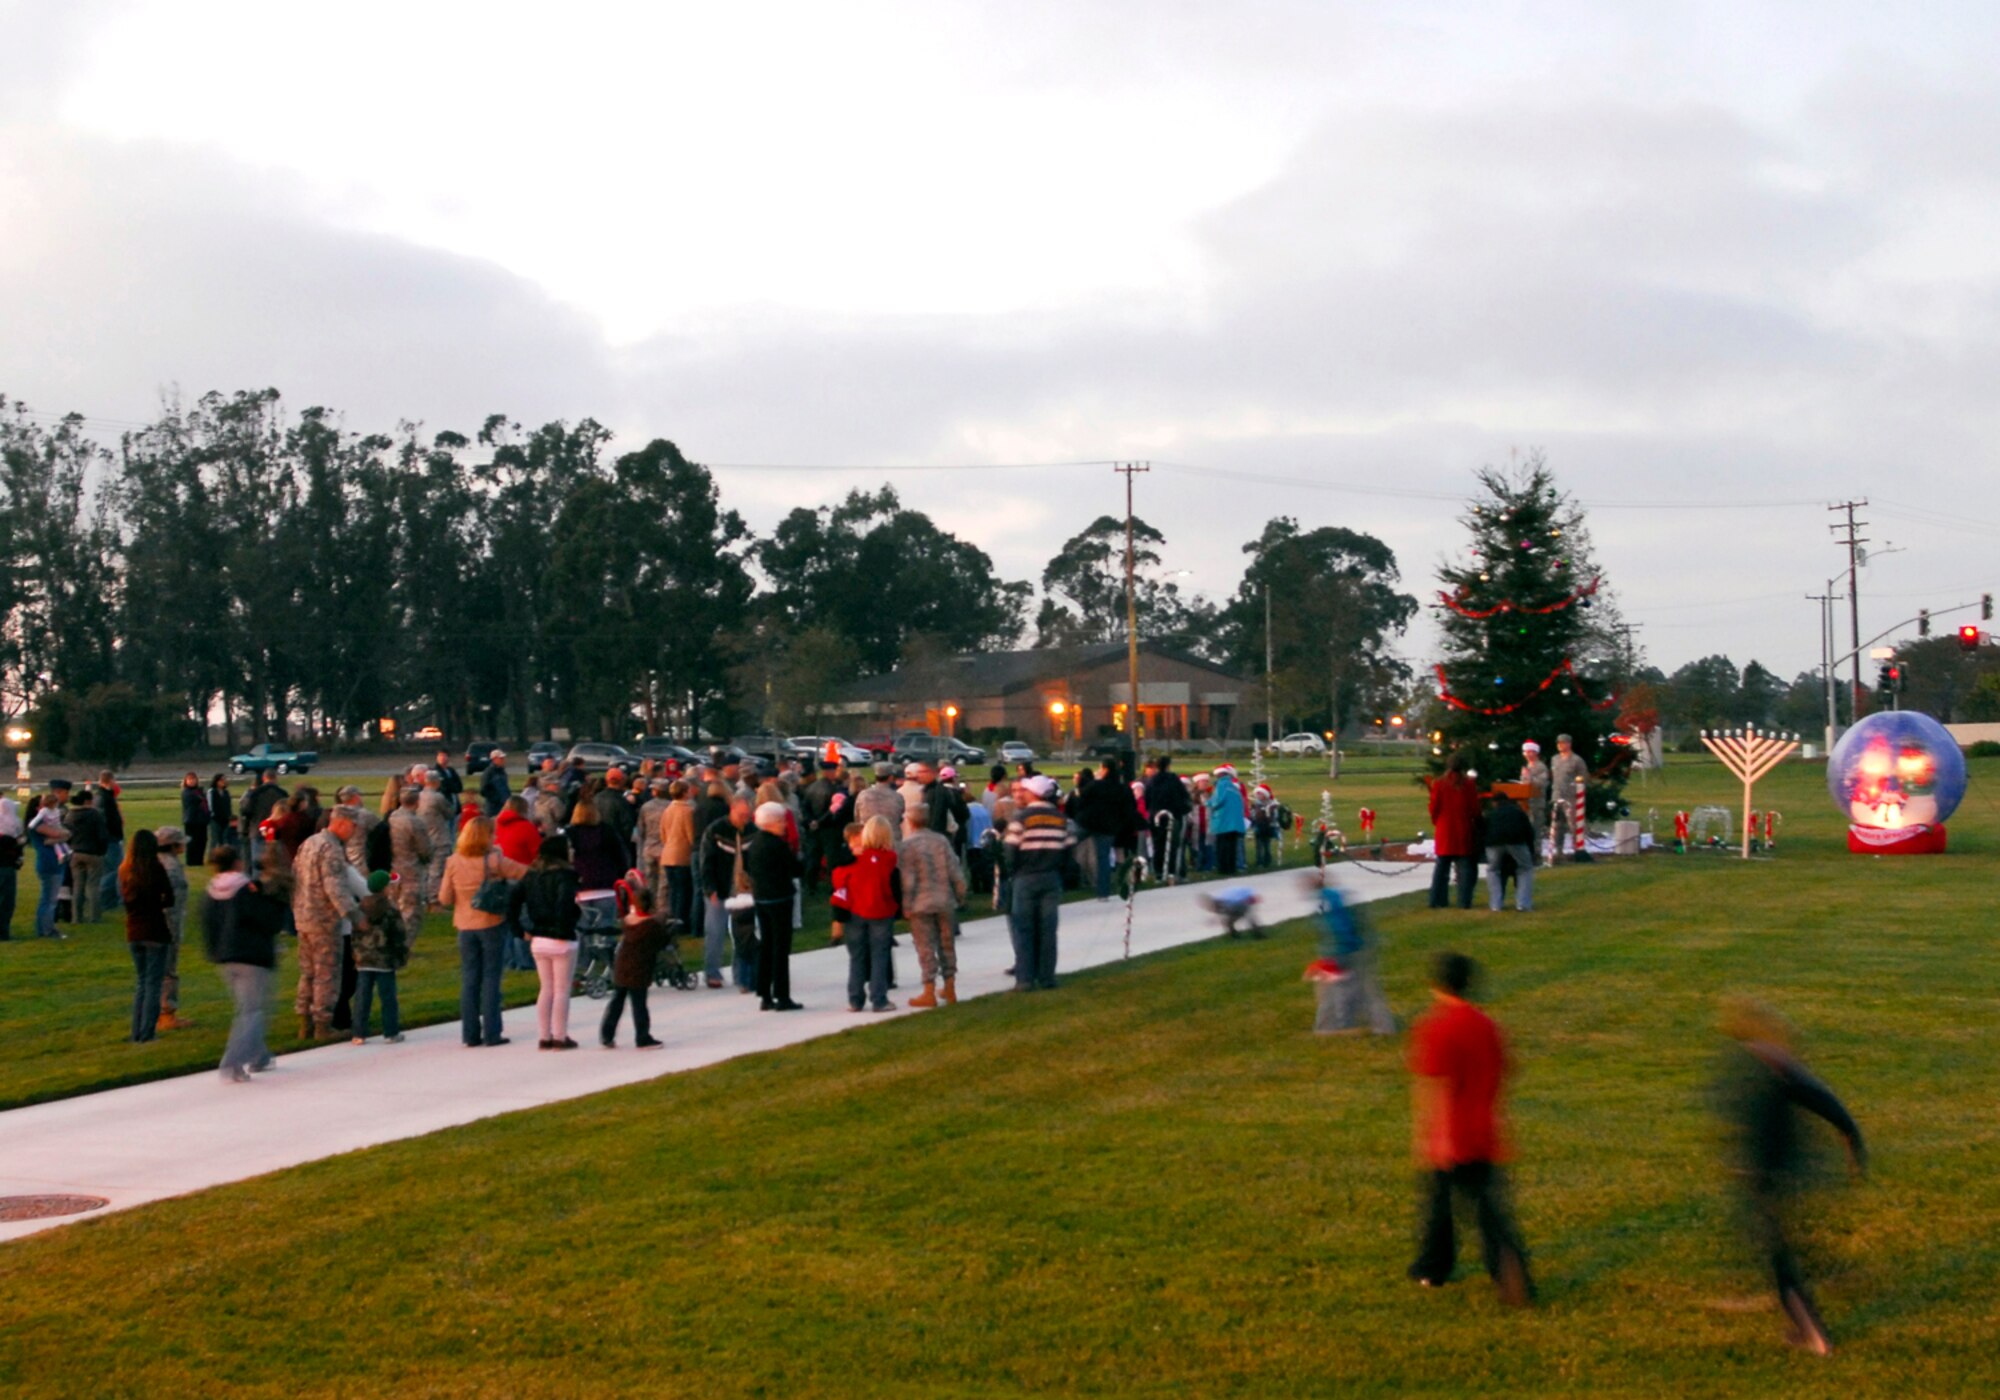 VANDENBERG AIR FORCE BASE, Calif. – Team Vandenberg gathers for the Holiday Tree Lighting Ceremony here at Building 11777 on Thursday, Dec. 3, 2009. The tree lighting ceremony was held in the spirit of the holiday season. (U.S. Air Force photo/Senior Airman Ashley Reed)